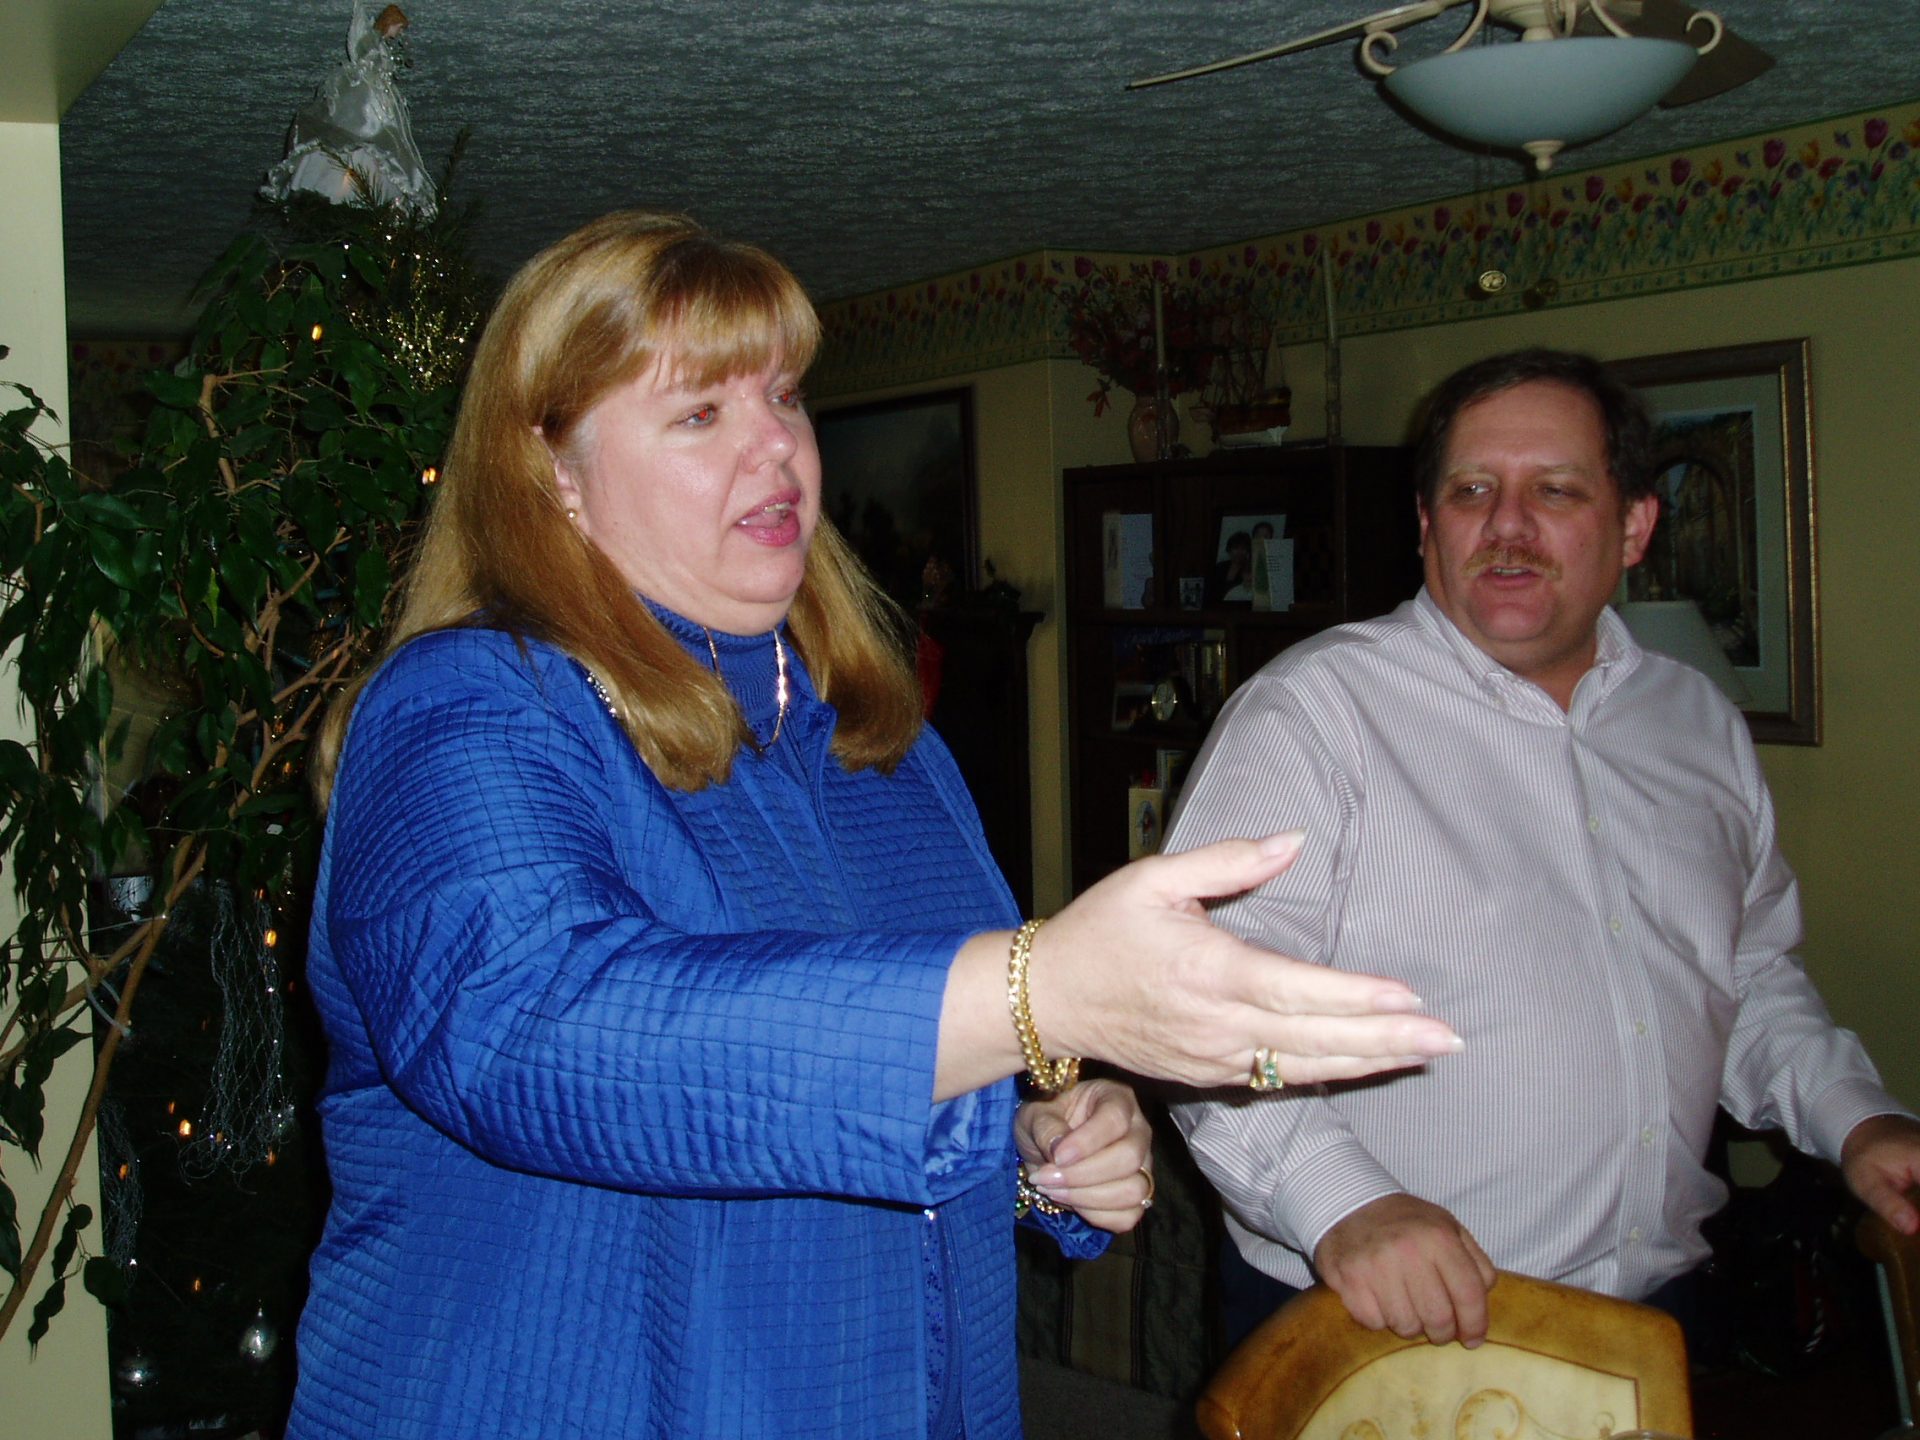 Sue telling stories at Ann Lowden's Holiday Party 2006.